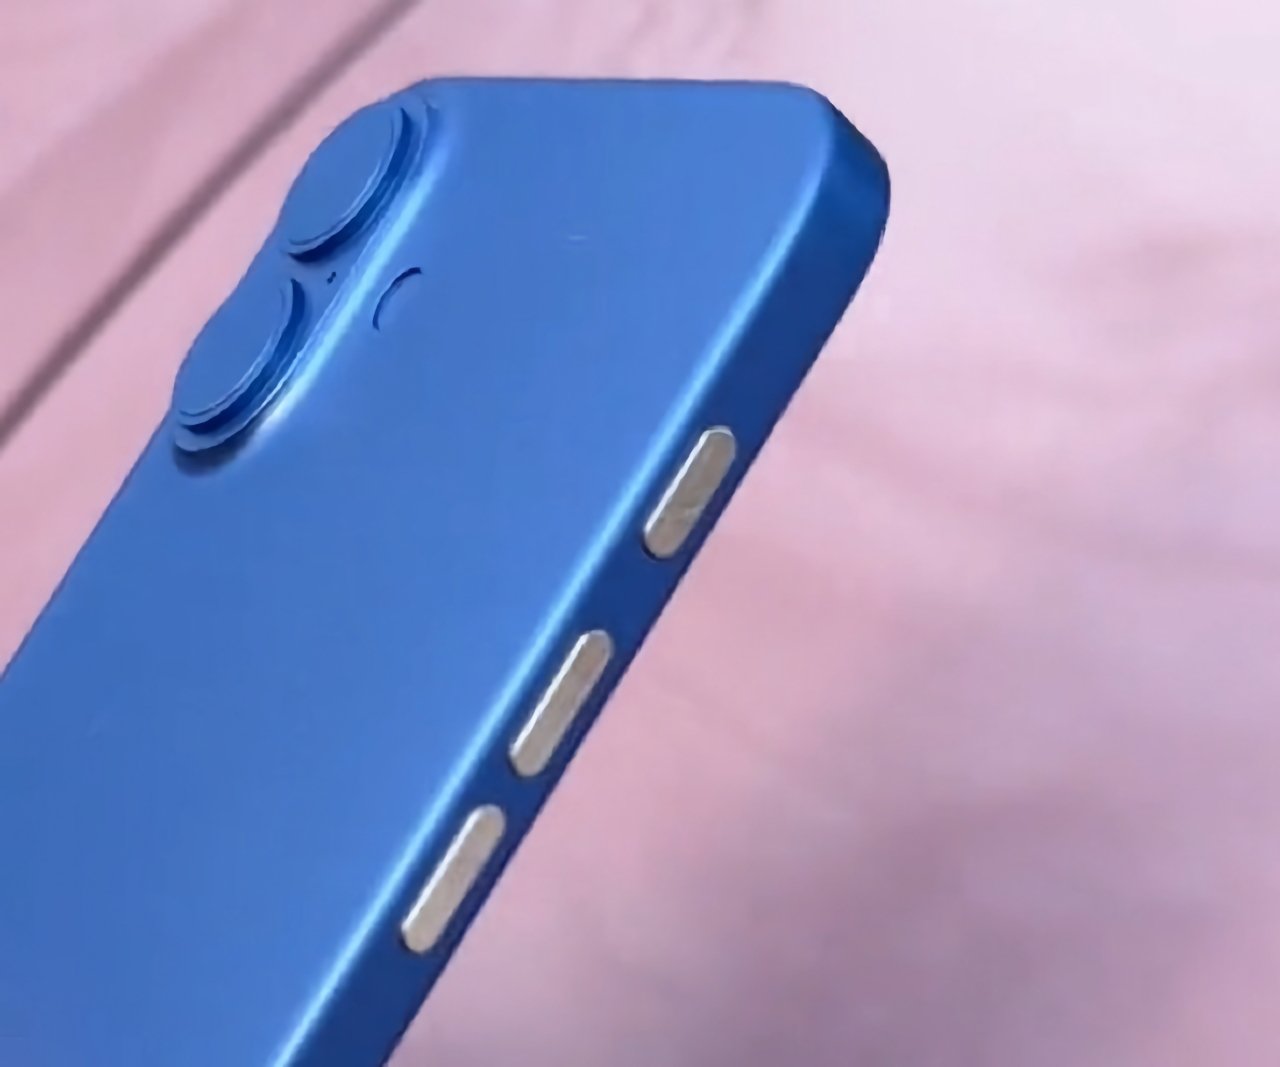 Close-up of a blue smartphone with dual cameras and side buttons, resting on a pink surface.